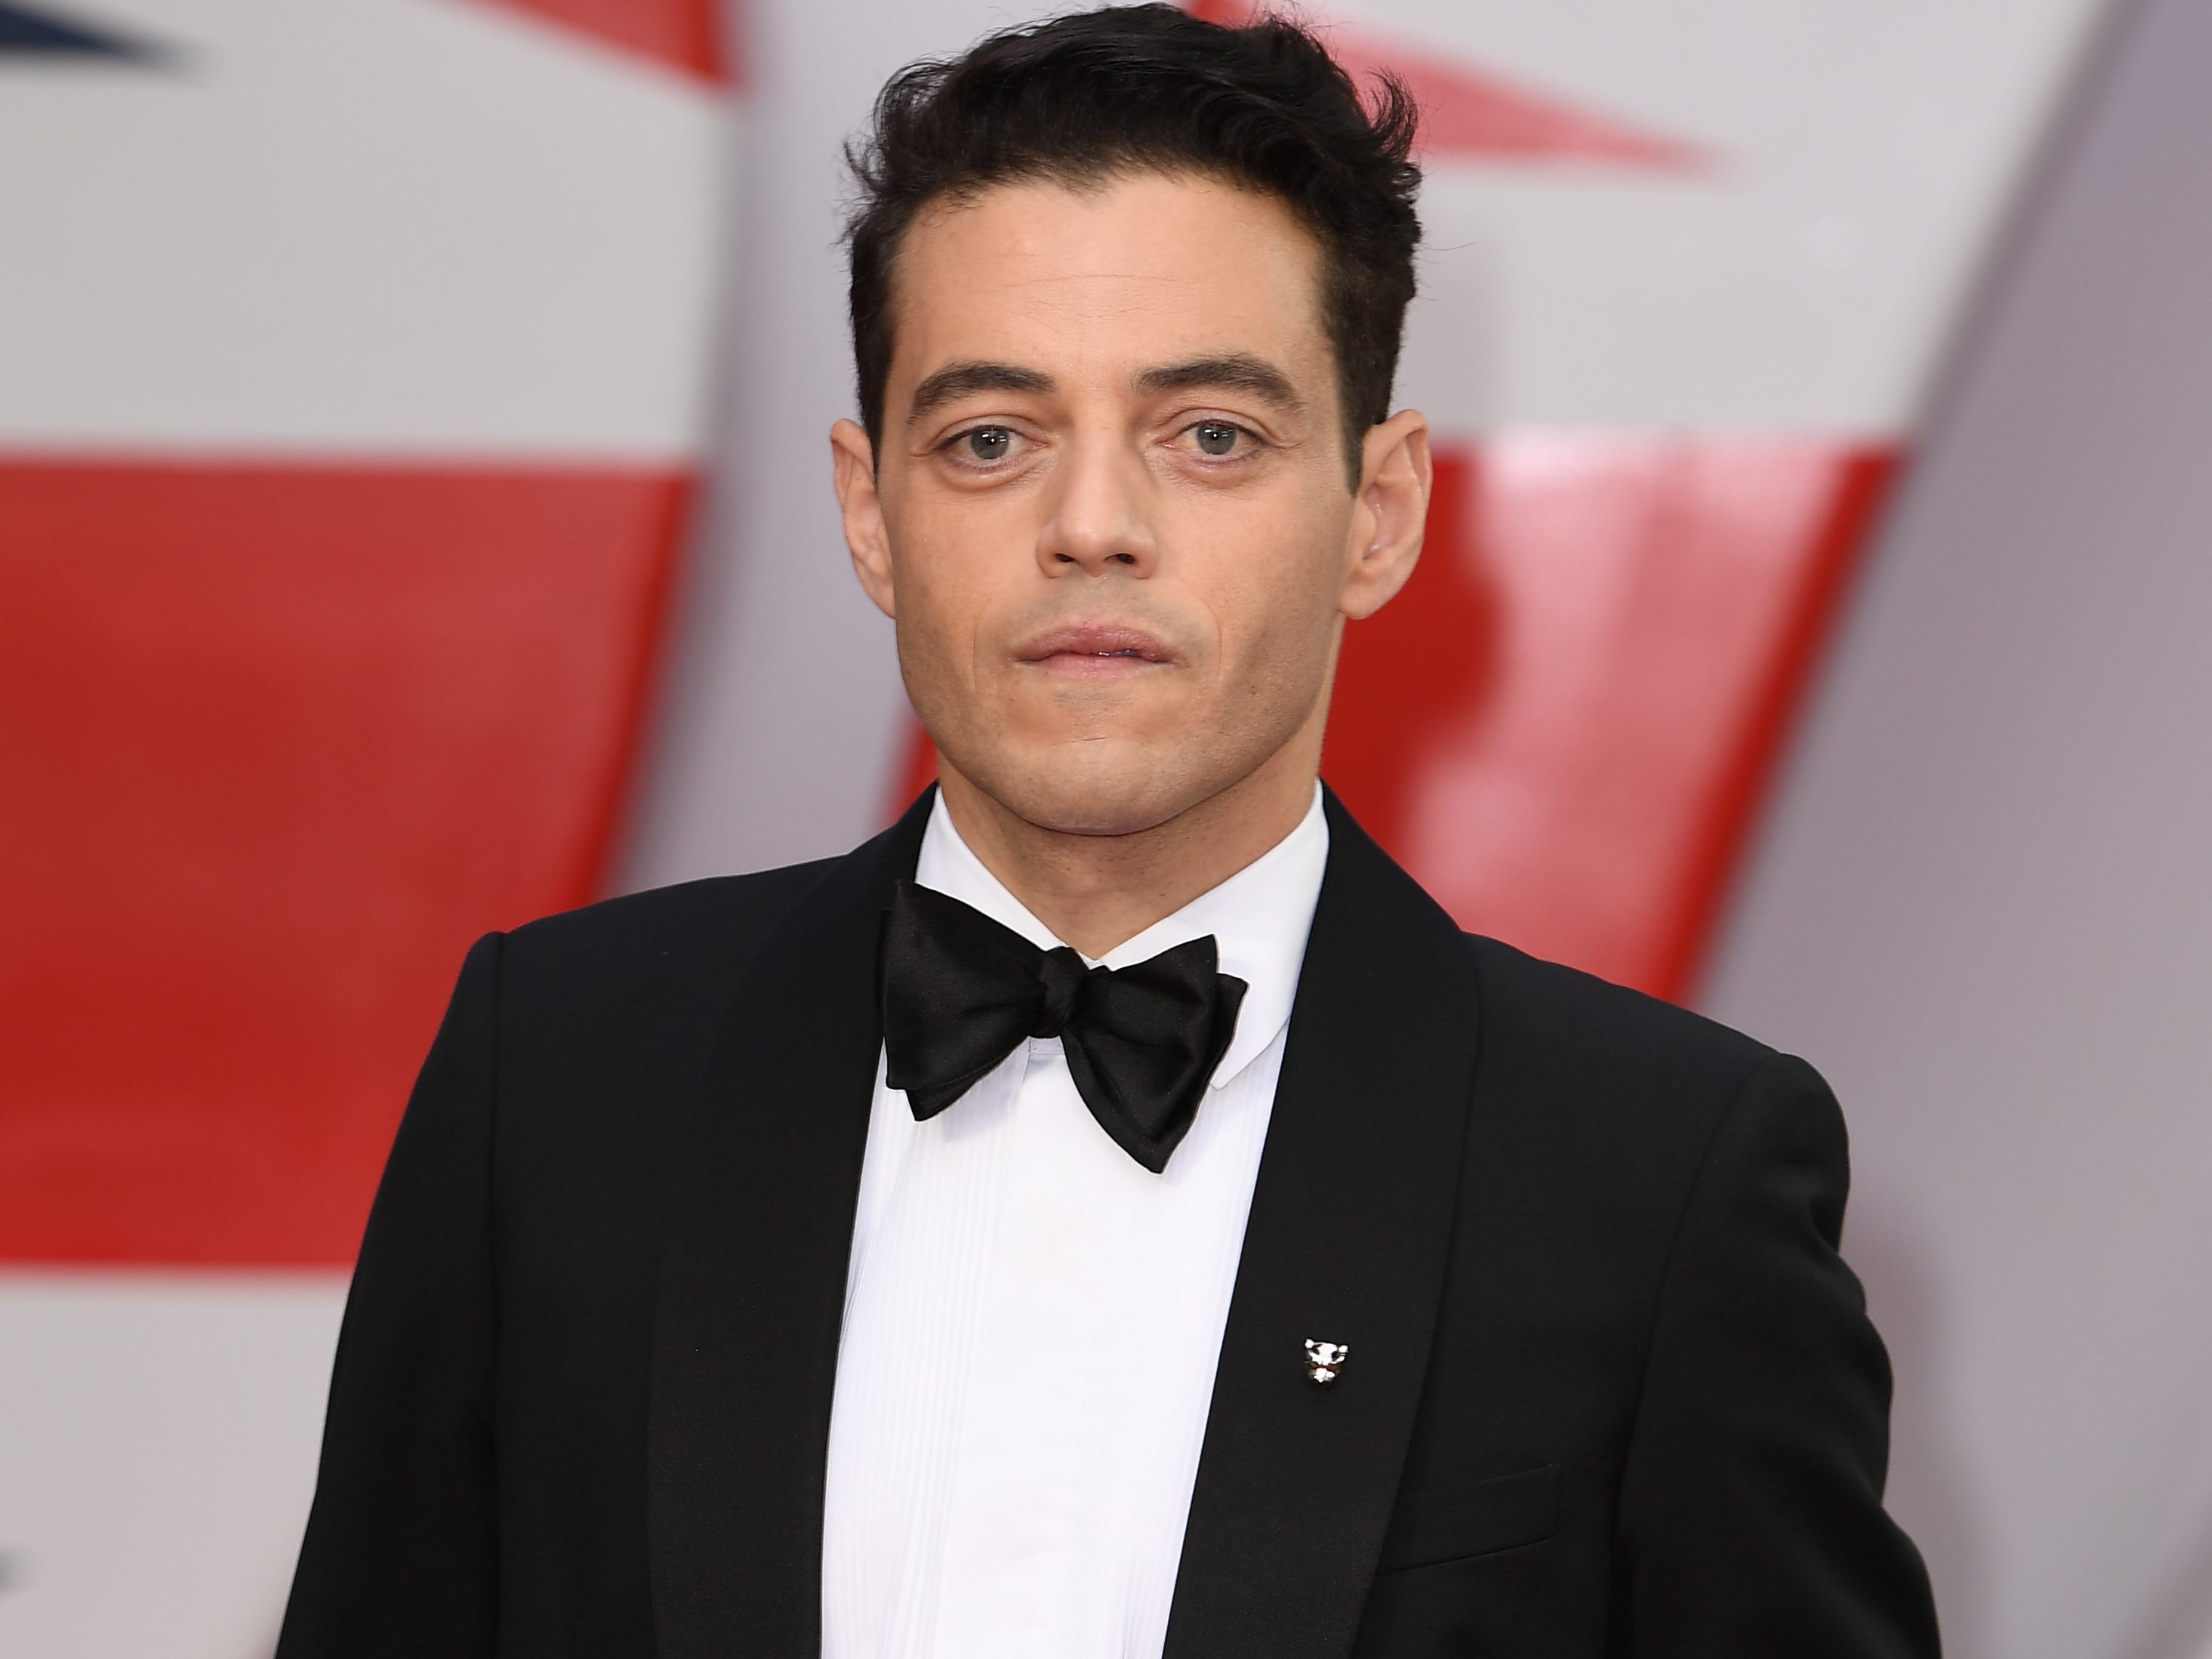 <p><a href="https://www.empireonline.com/movies/news/rami-malek-starring-in-cia-thriller-the-amateur/">20th Century Studios' spy thriller</a> stars Rami Malek as a CIA cryptographer who loses his wife in a terrorist attack.</p><p>When the agency won't go after her killer due to an internal conflict, Malek's character blackmails the CIA.</p><p>Rachel Brosnahan, Laurence Fishburne, and Julianne Nicholson also star.</p>